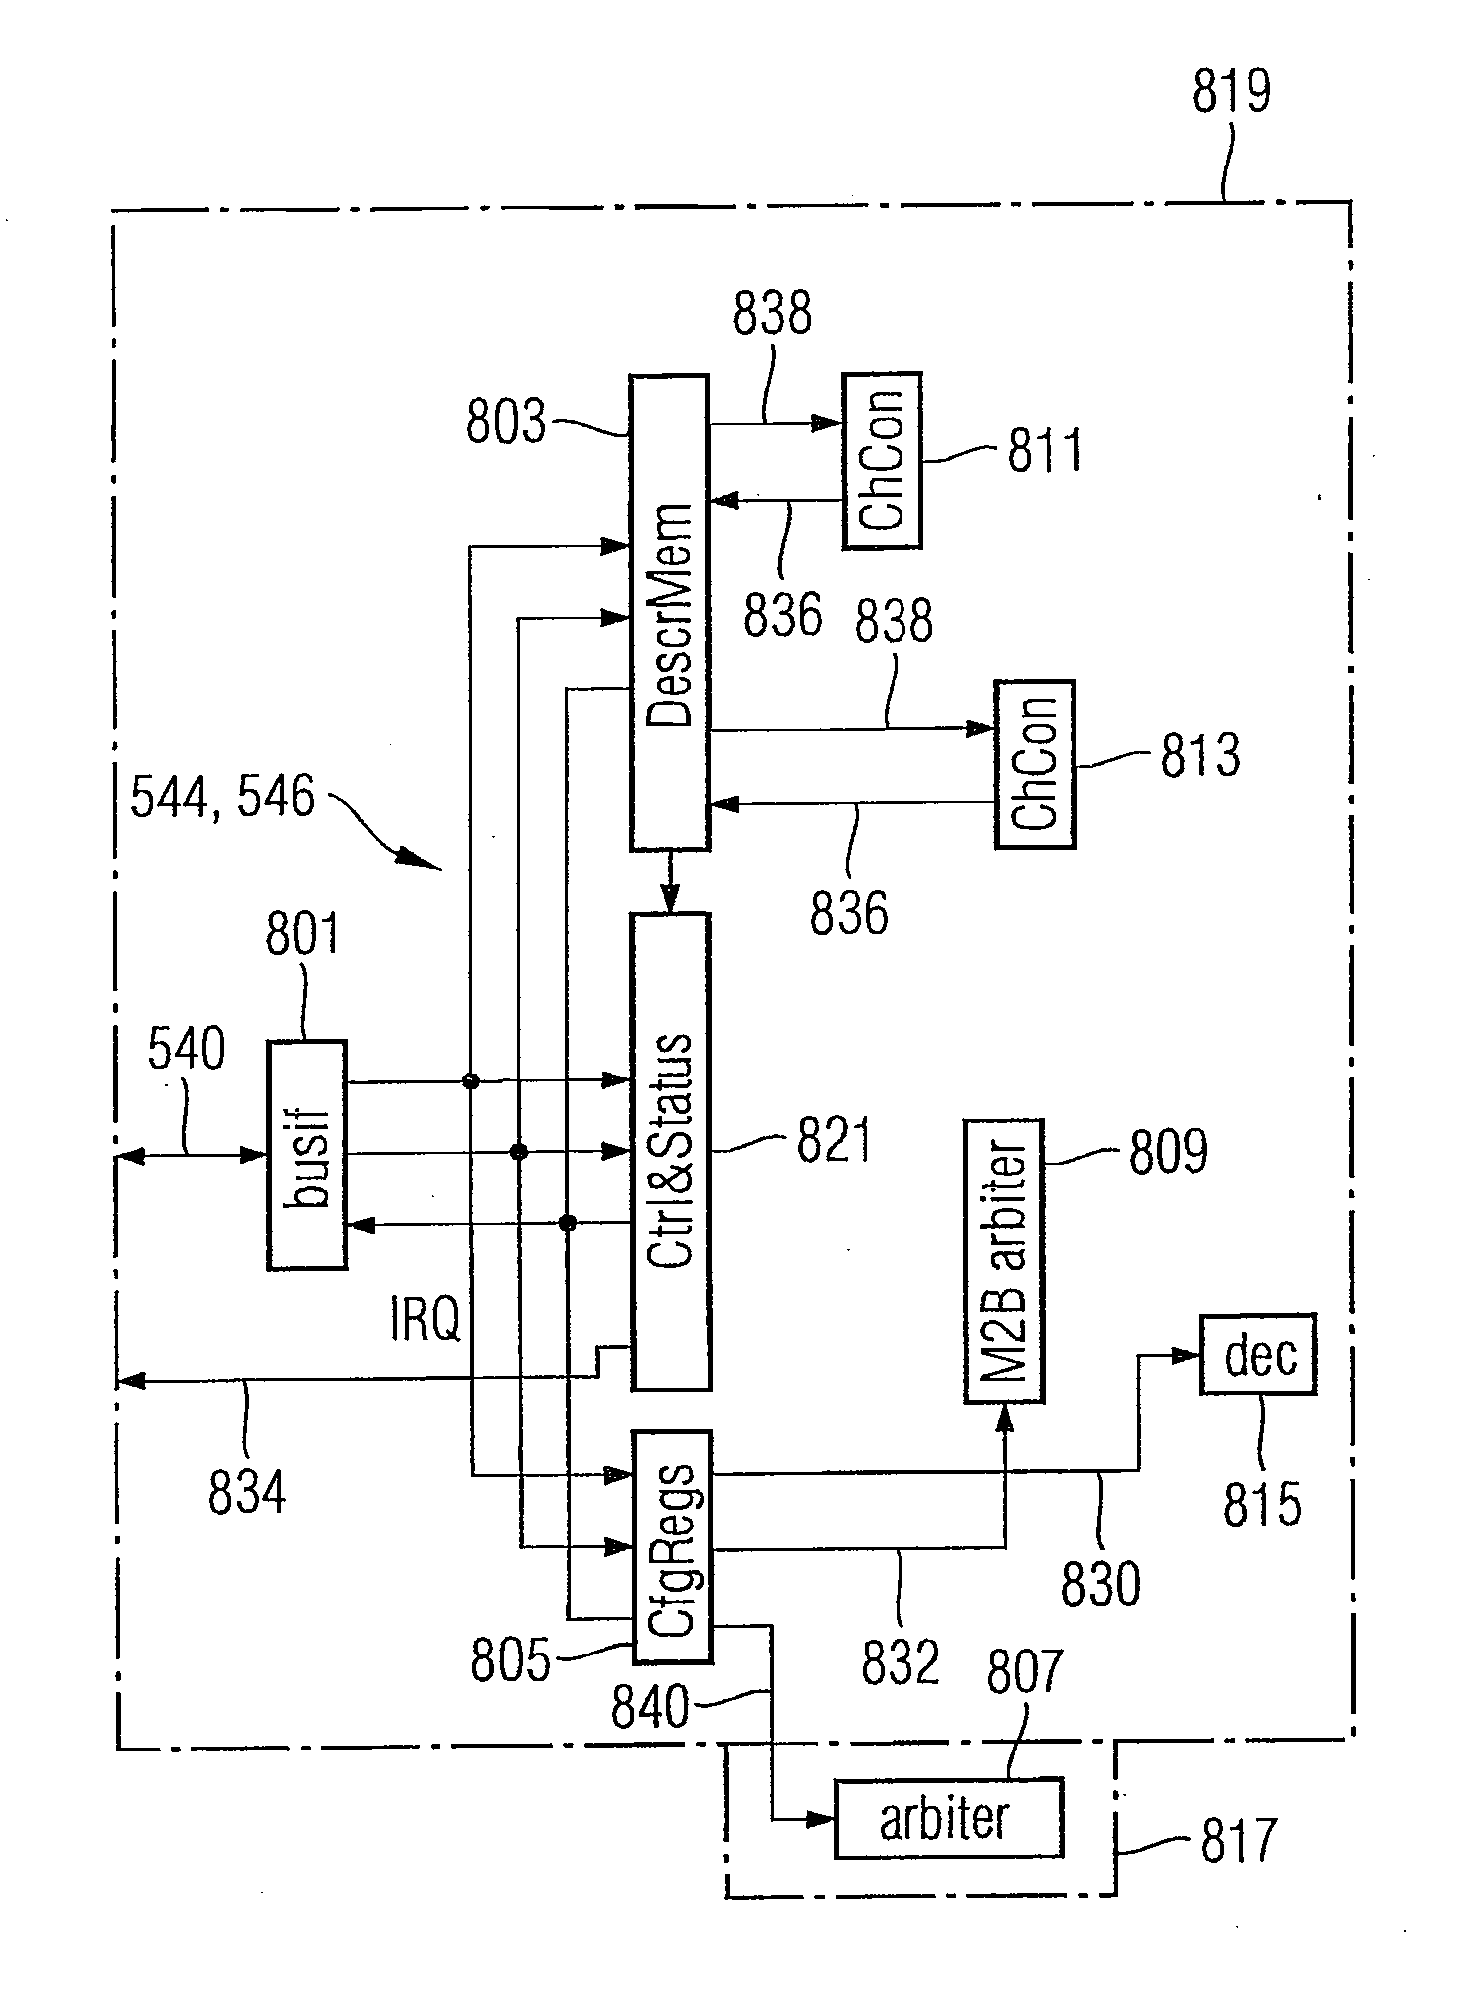 Memory and Memory Communication System